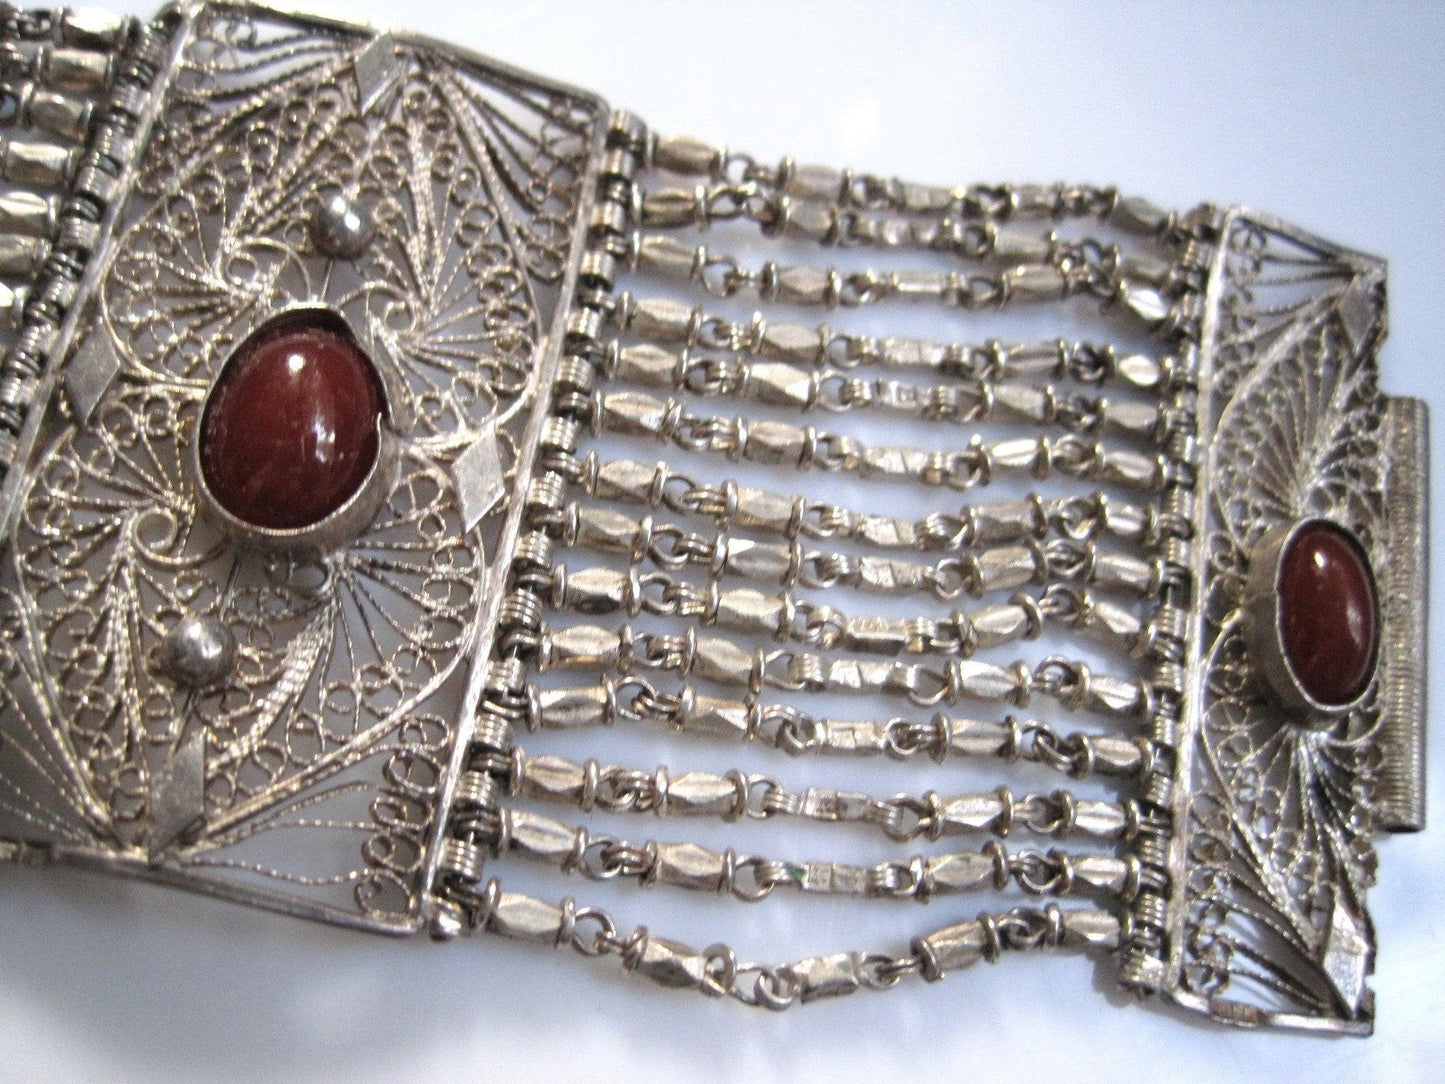 Vintage Silver and Carnelian Egyptian Link Bracelet from the 1930s - Anteeka